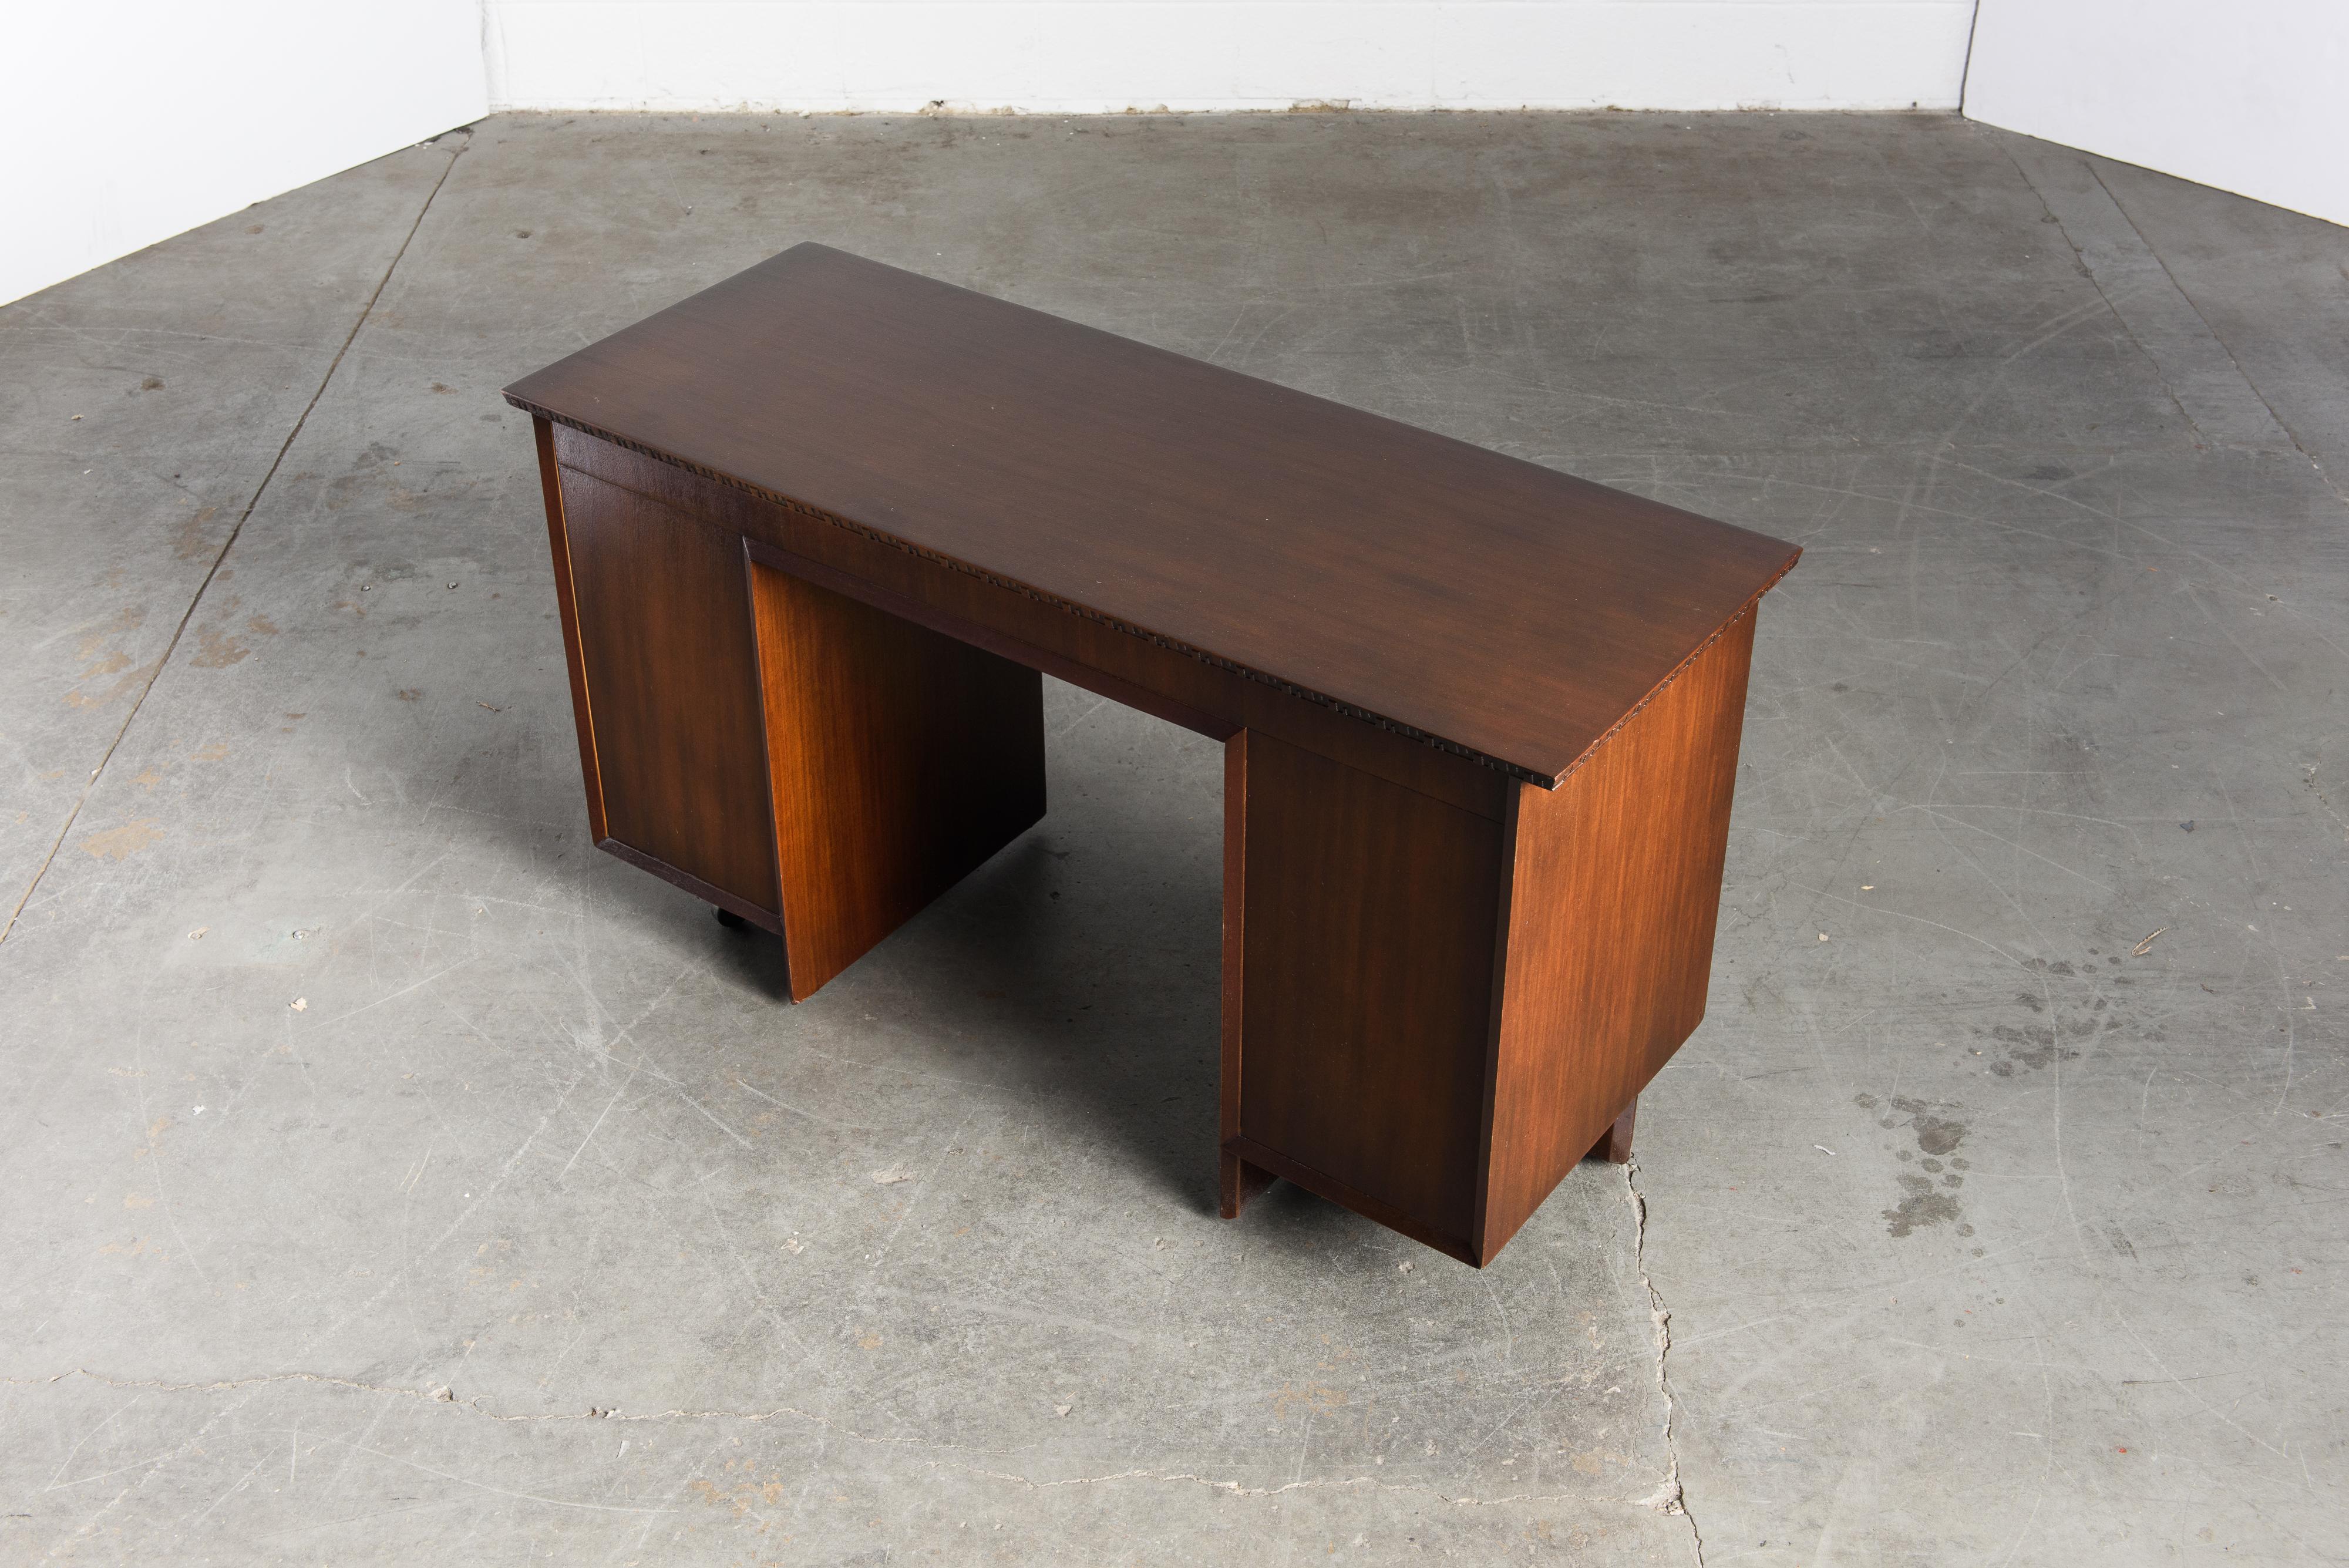 'Taliesin' Mahogany Desk with Pull-Out Table by Frank Lloyd Wright, 1955, Signed 5